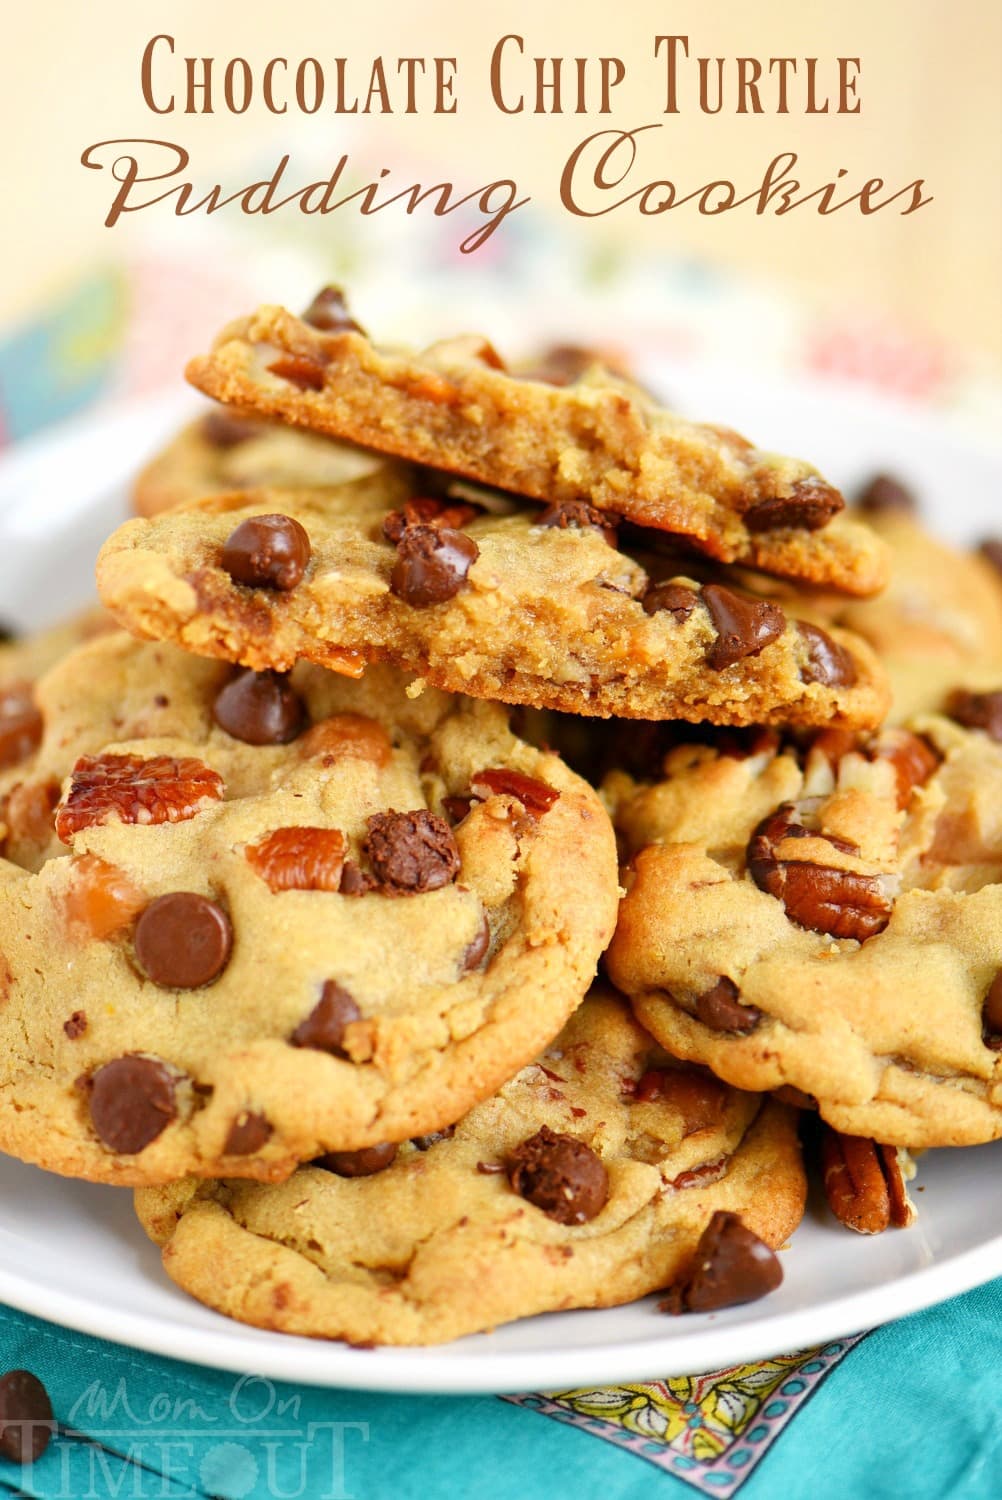 Outrageous Chocolate Chip Turtle Pudding Cookies are loaded with chocolate chips, pecans, and caramel. These giant, bakery style cookies will steal the show! Extra chewy and packed with flavor!